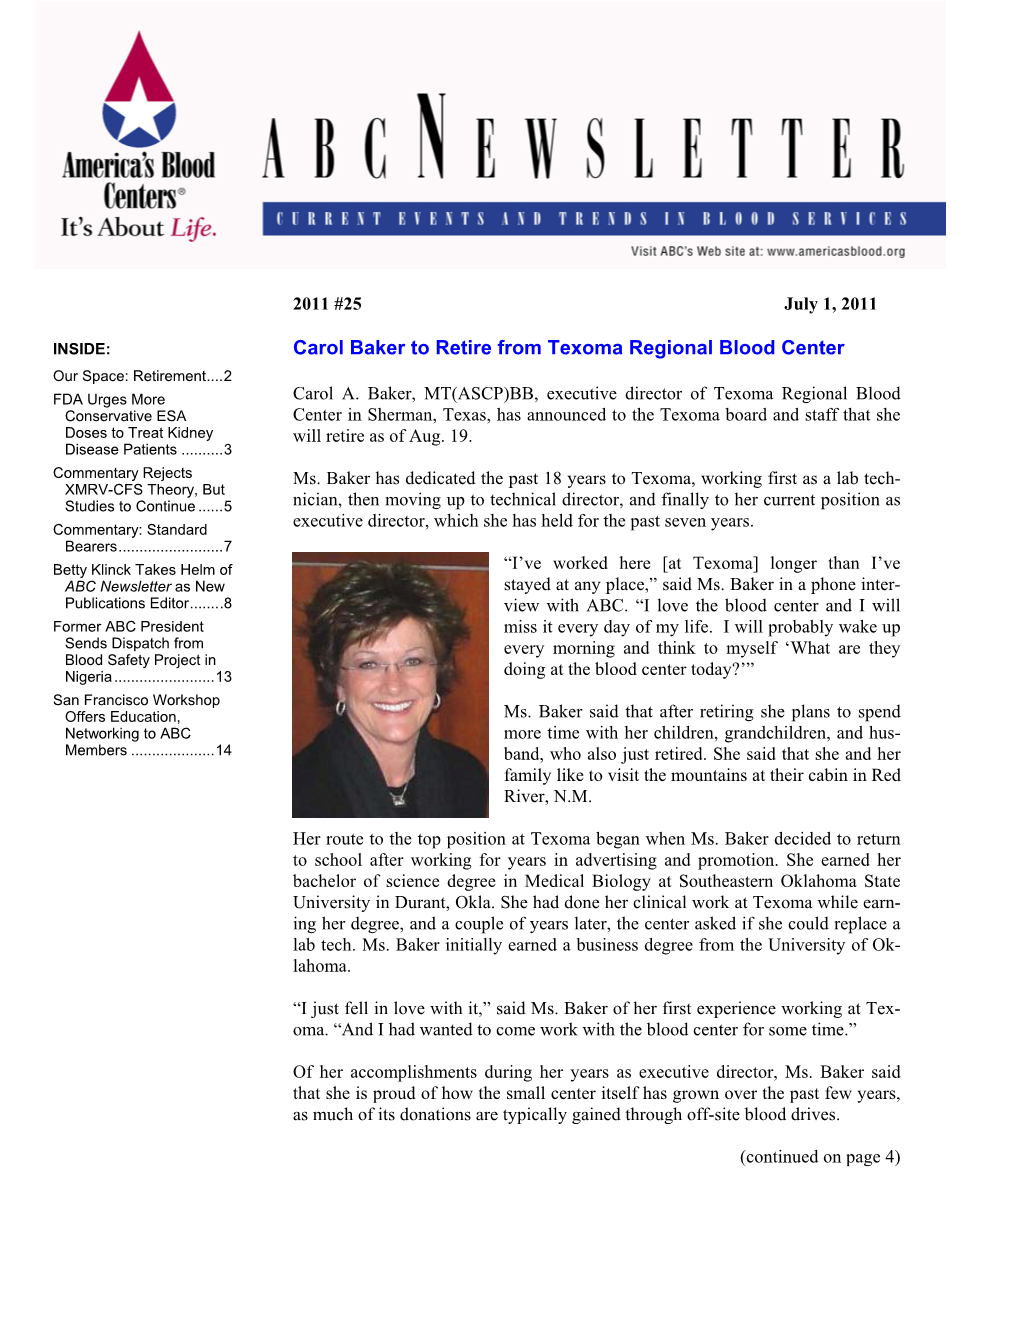 Carol Baker to Retire from Texoma Regional Blood Center Our Space: Retirement....2 FDA Urges More Carol A